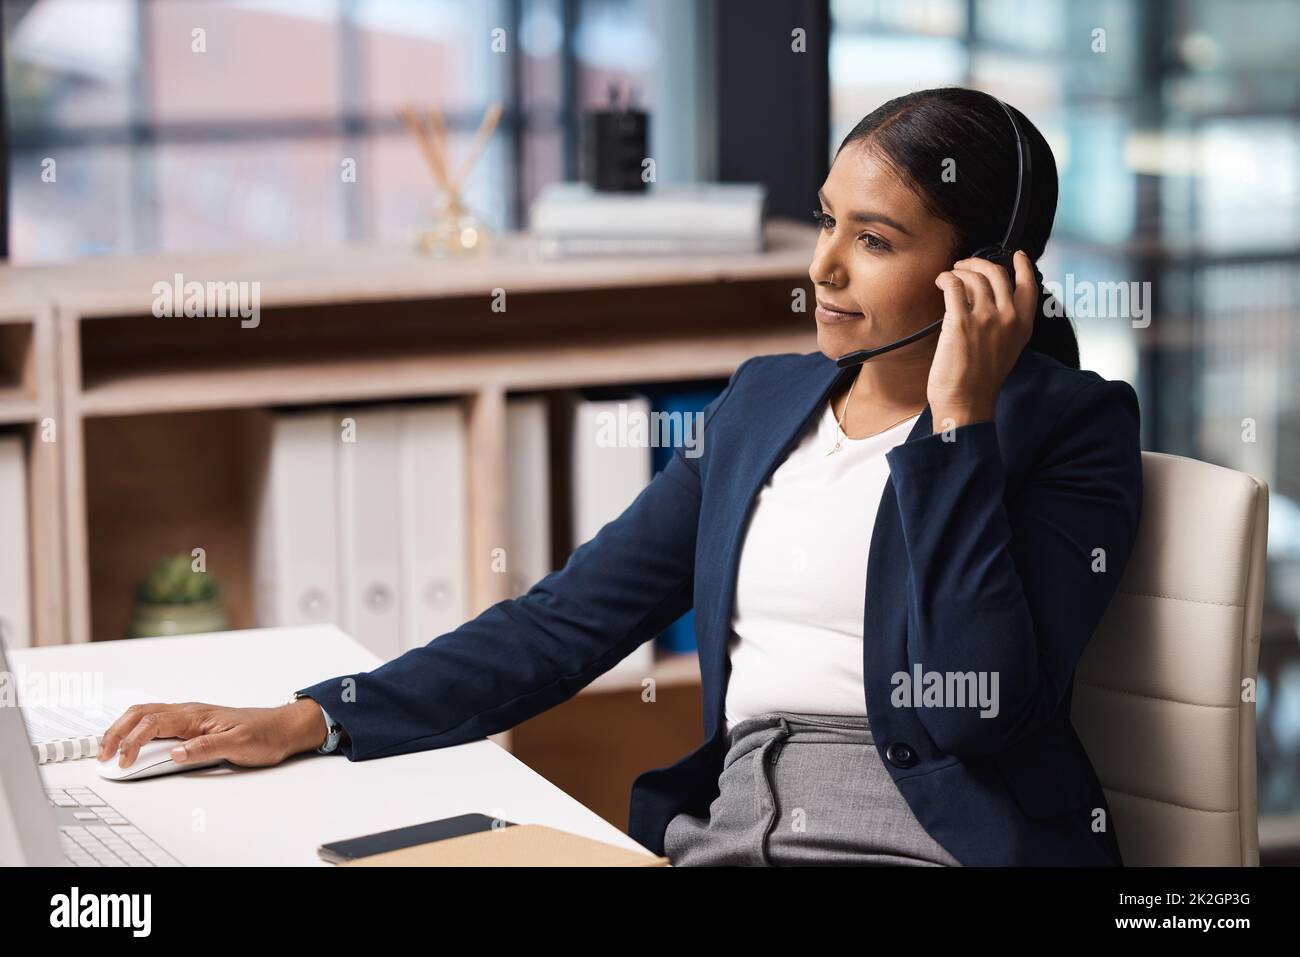 Taking on her role as an efficient agent. Shot of a young businesswoman working on a computer in a call centre. Stock Photo